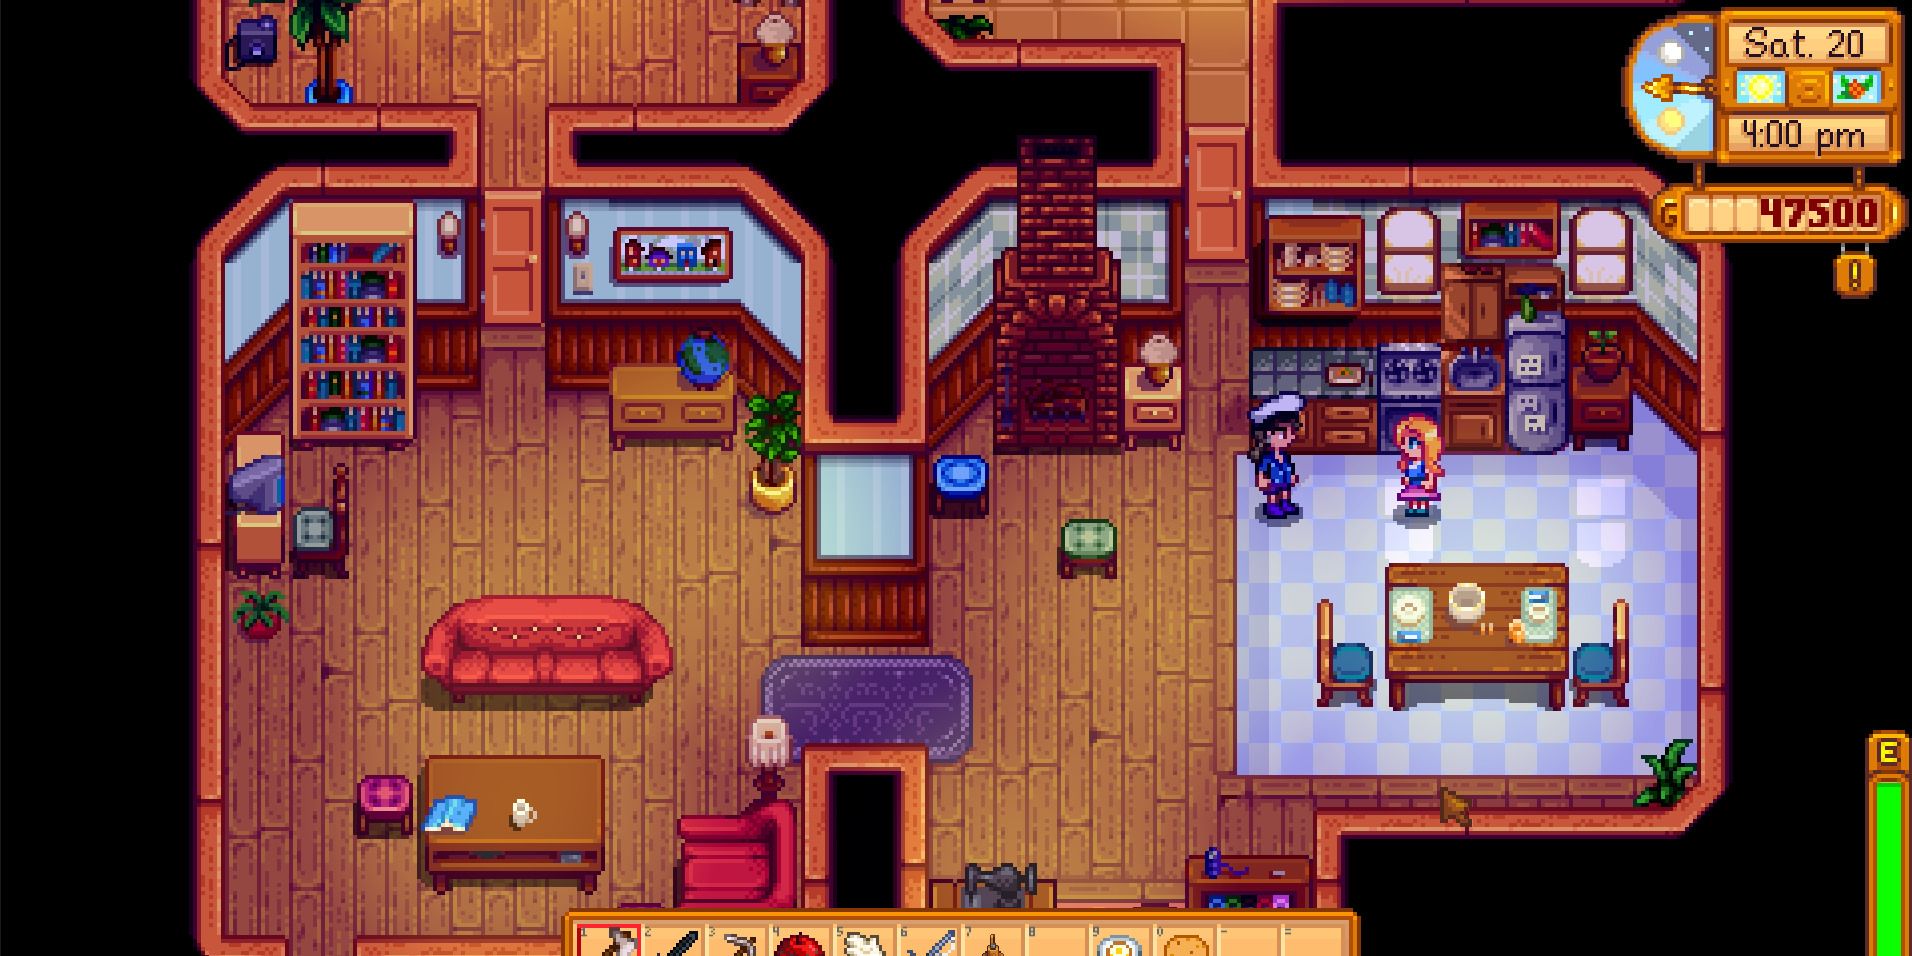 Image of a character standing in Haley's house in Stardew Valley